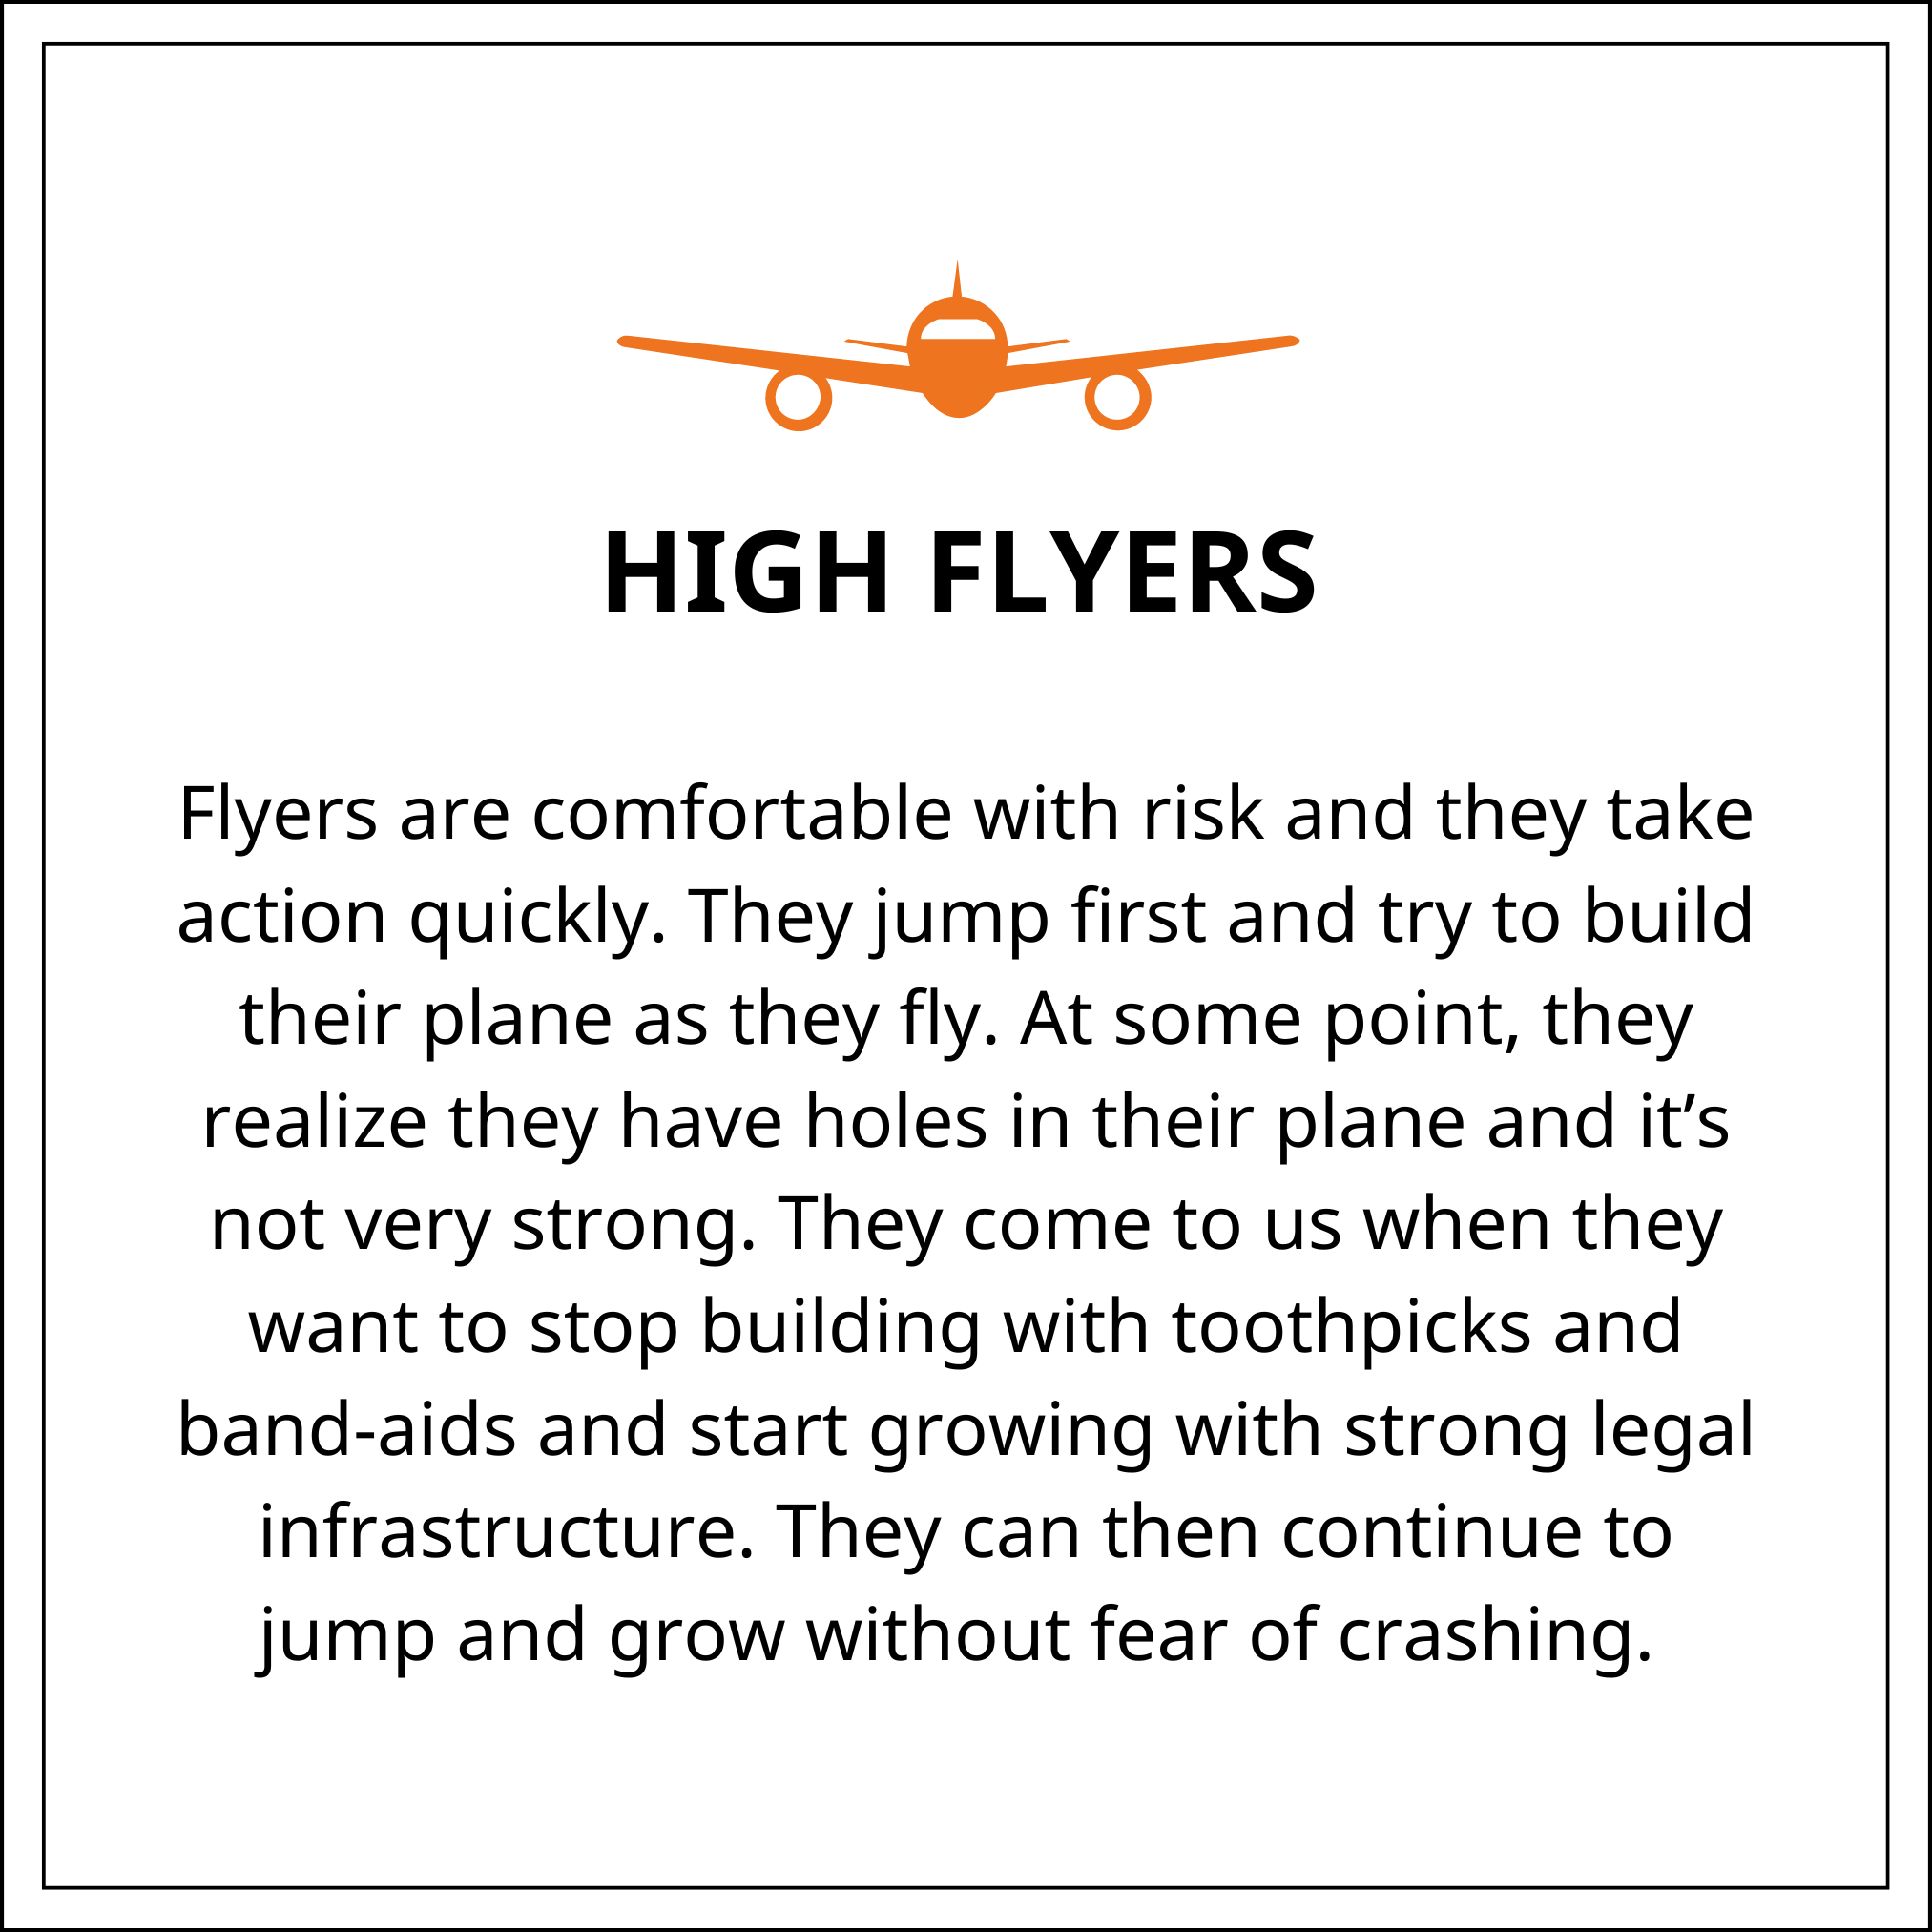 Are you a flyer?